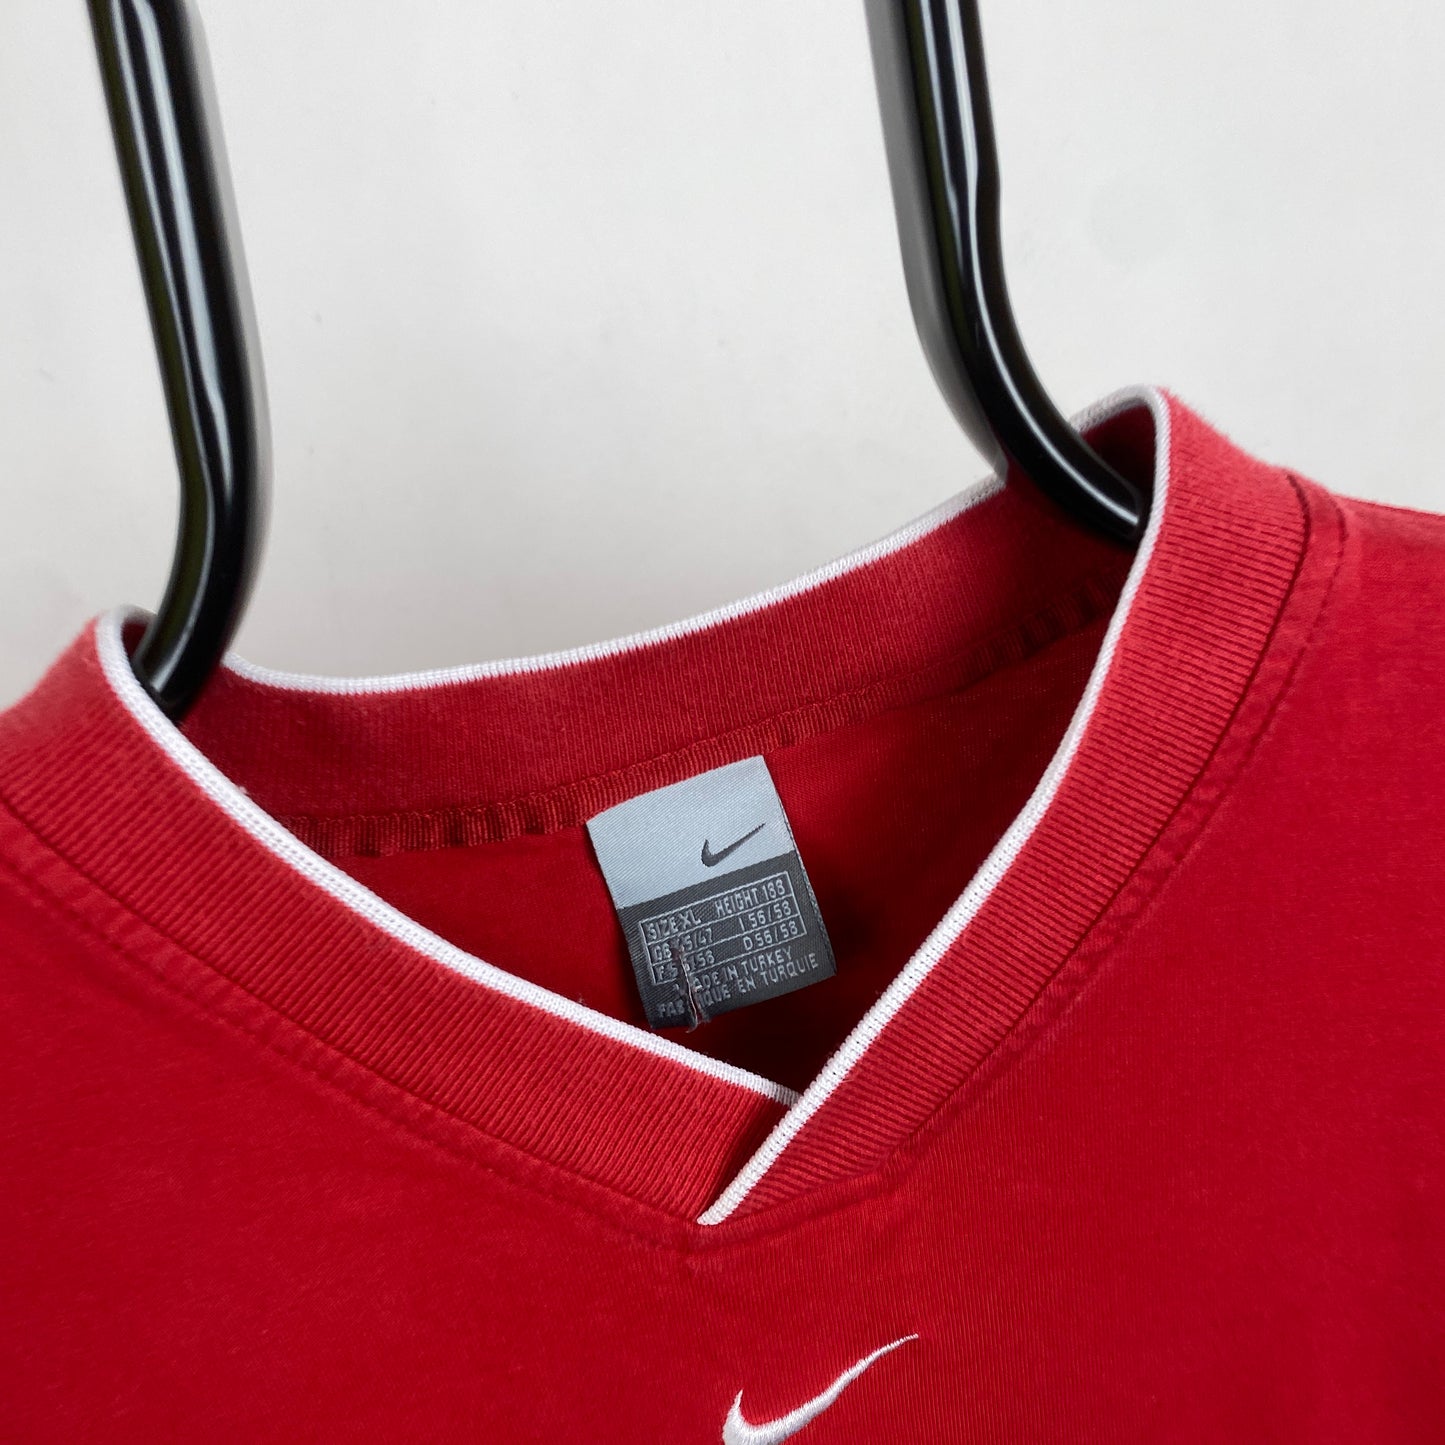 00s Nike Centre Swoosh T-Shirt Red XL